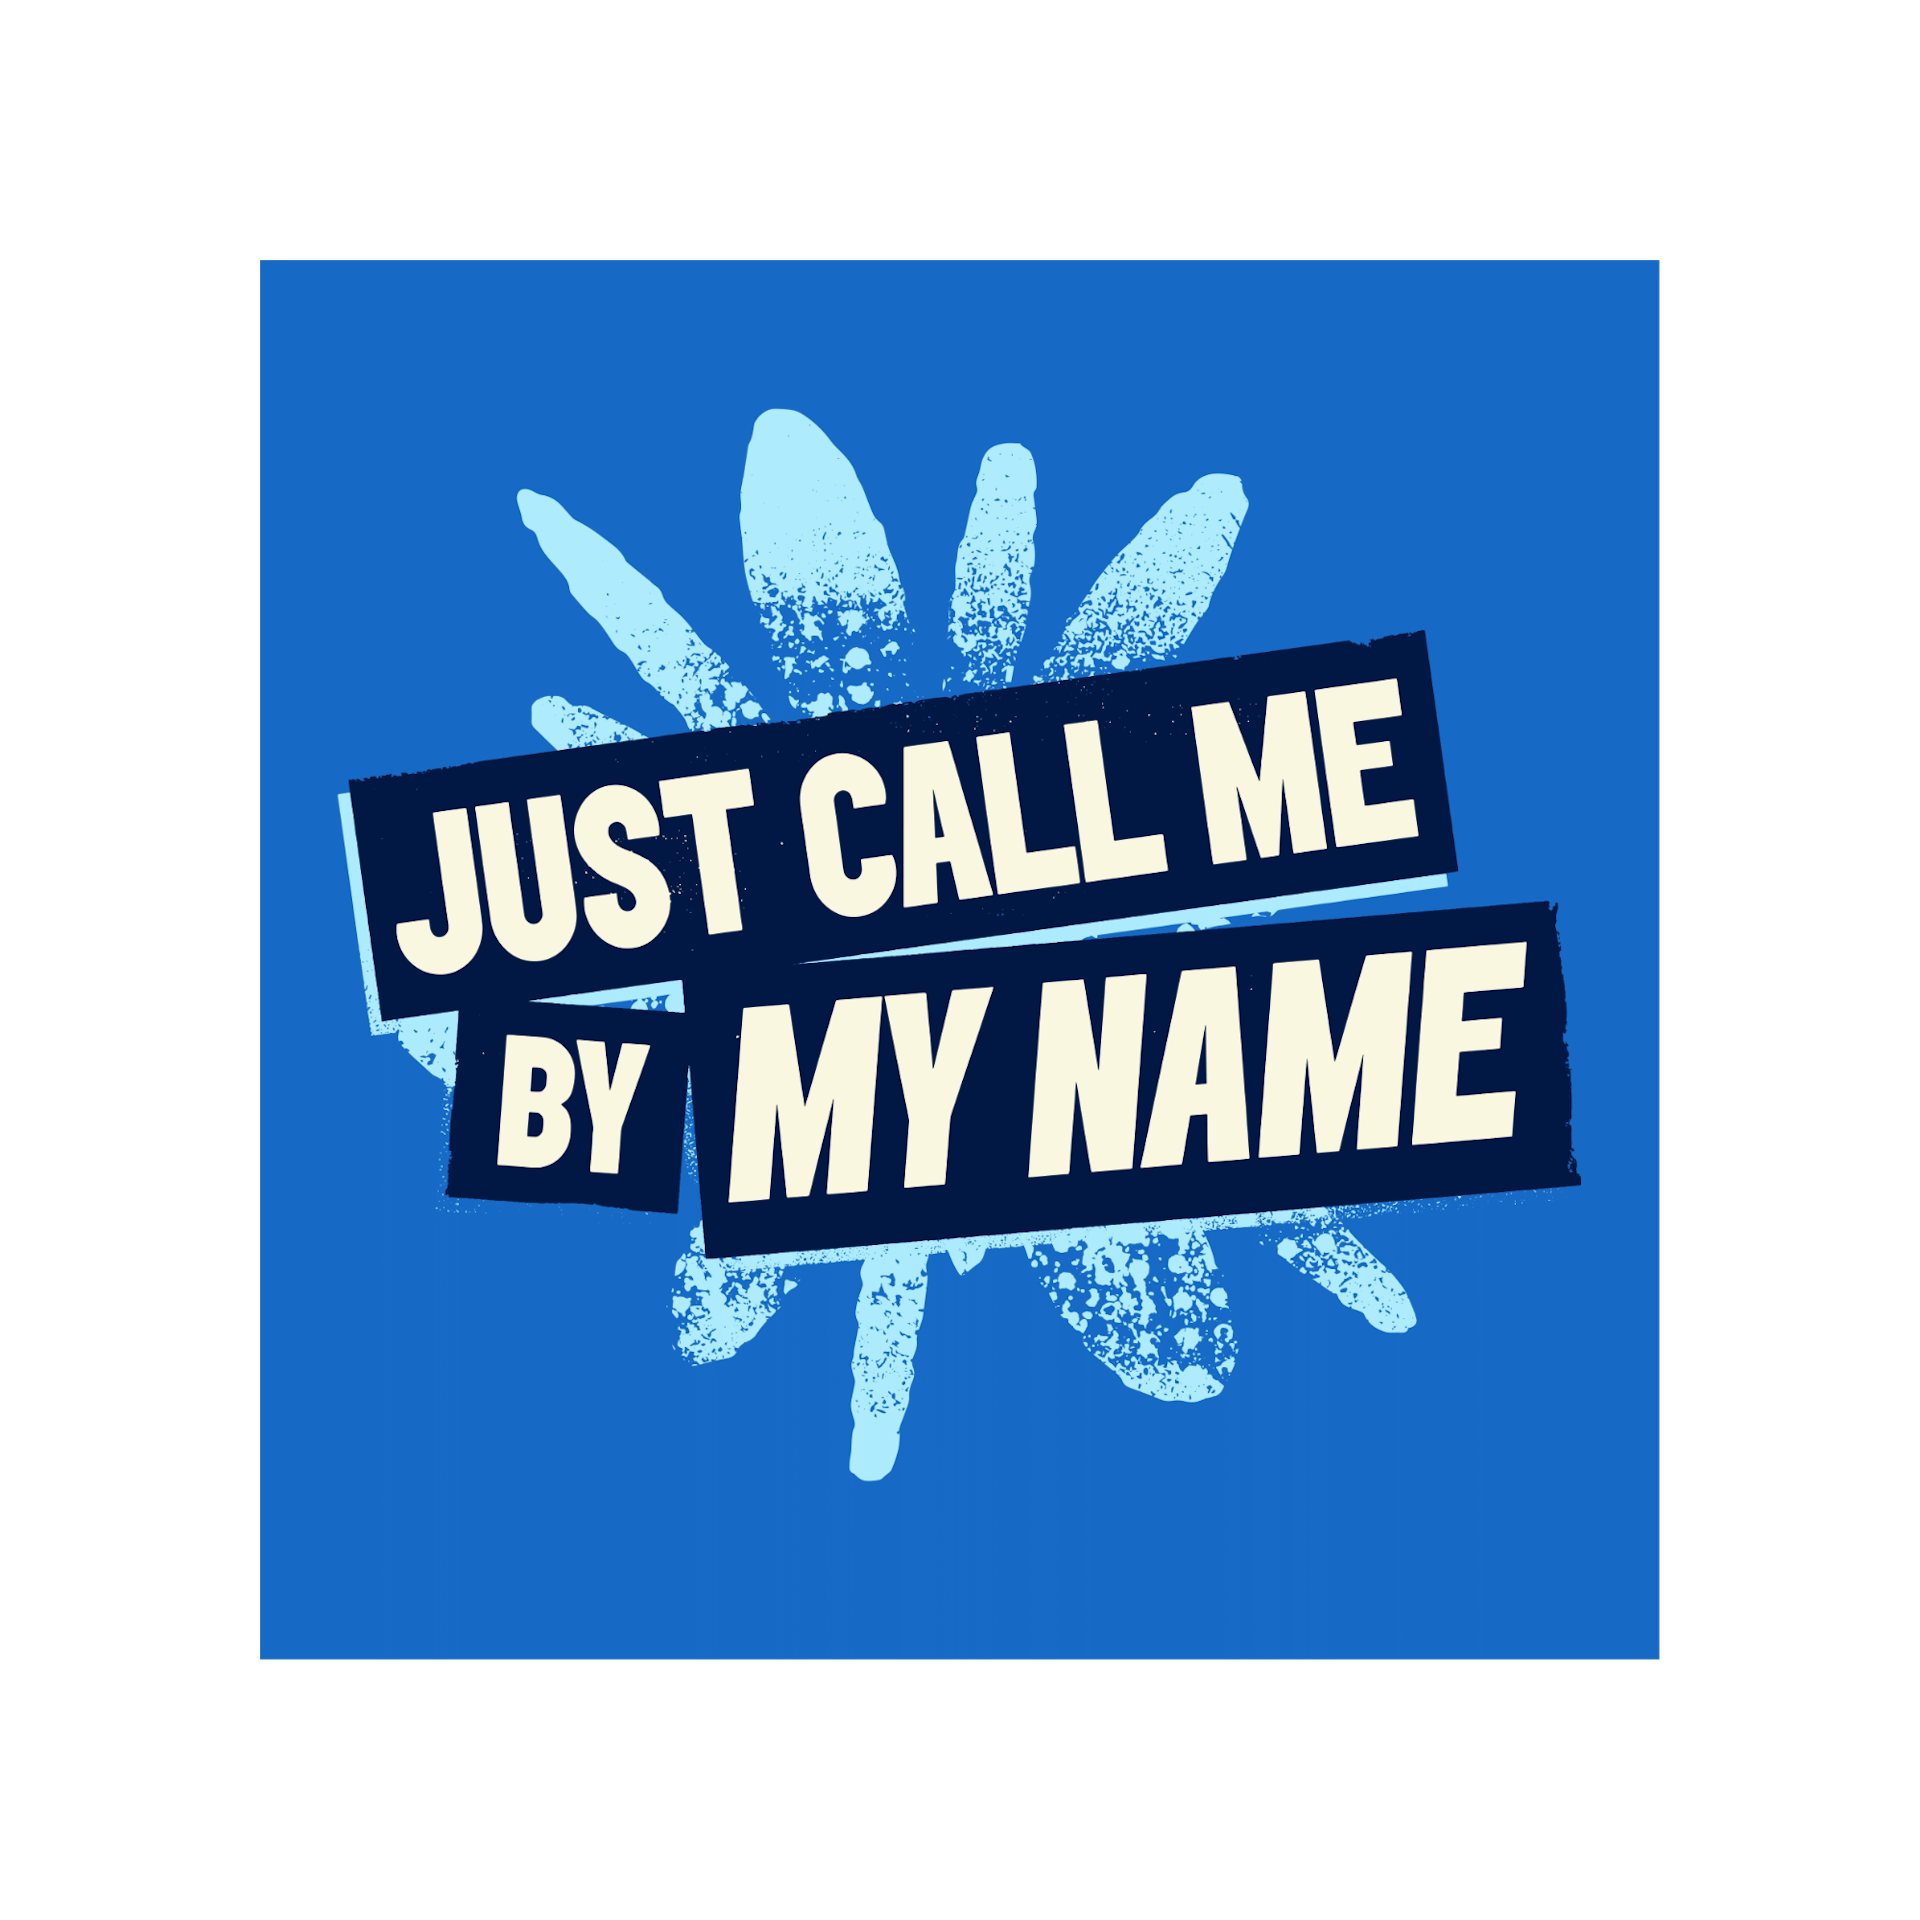 Block text reading "Just Call Me By My Name", in front of an abstract blue paint splash shape.